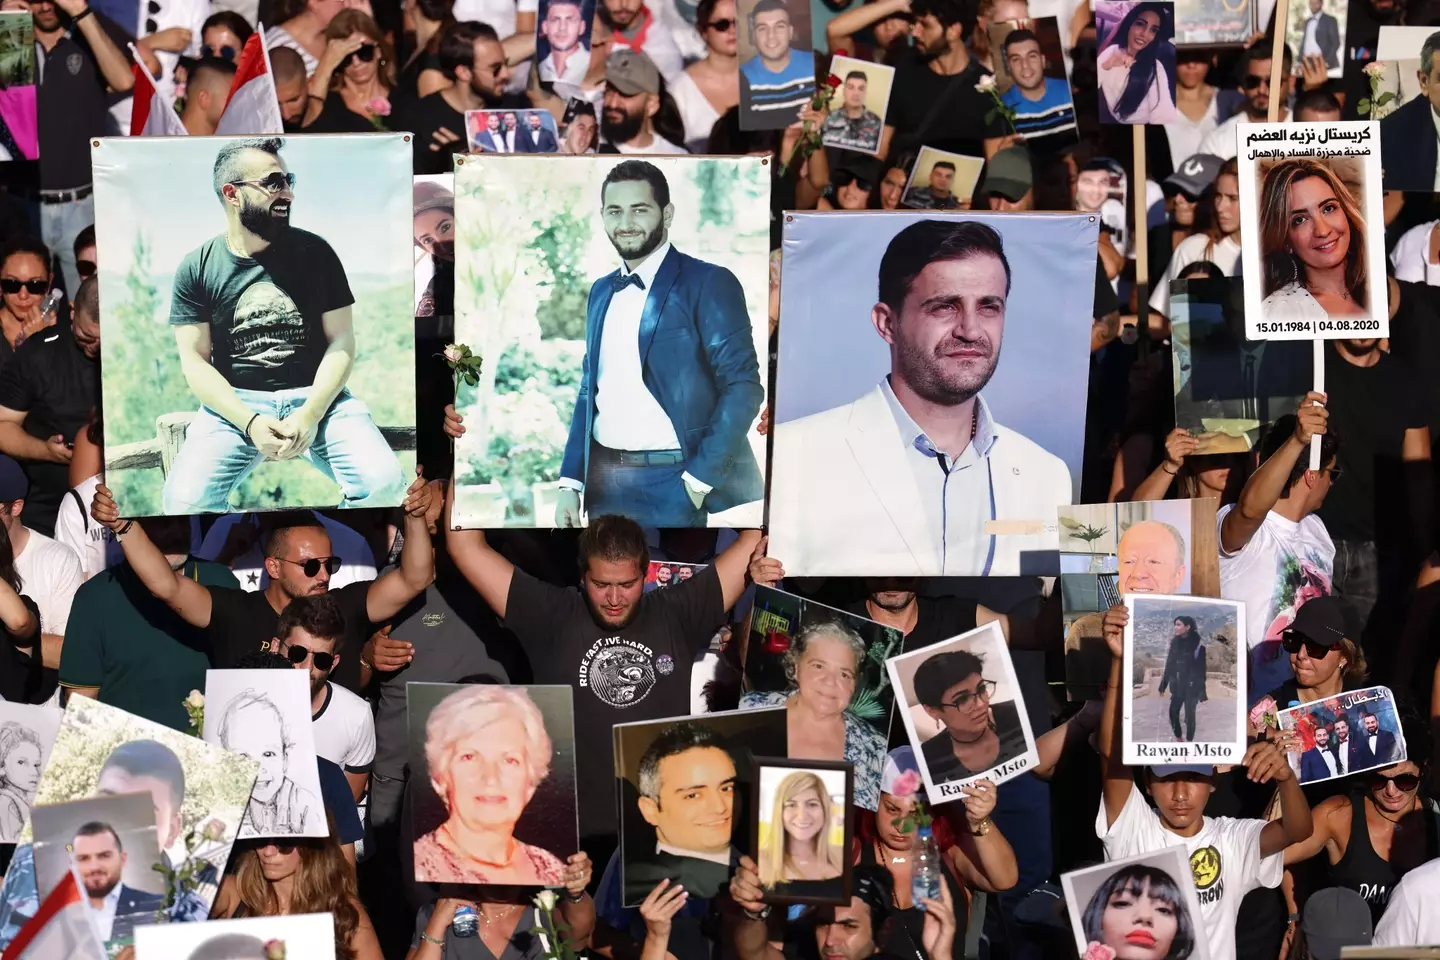 People hold up images of those killed in the explosion on its third anniversary. (JOSEPH EID/AFP via Getty Images)